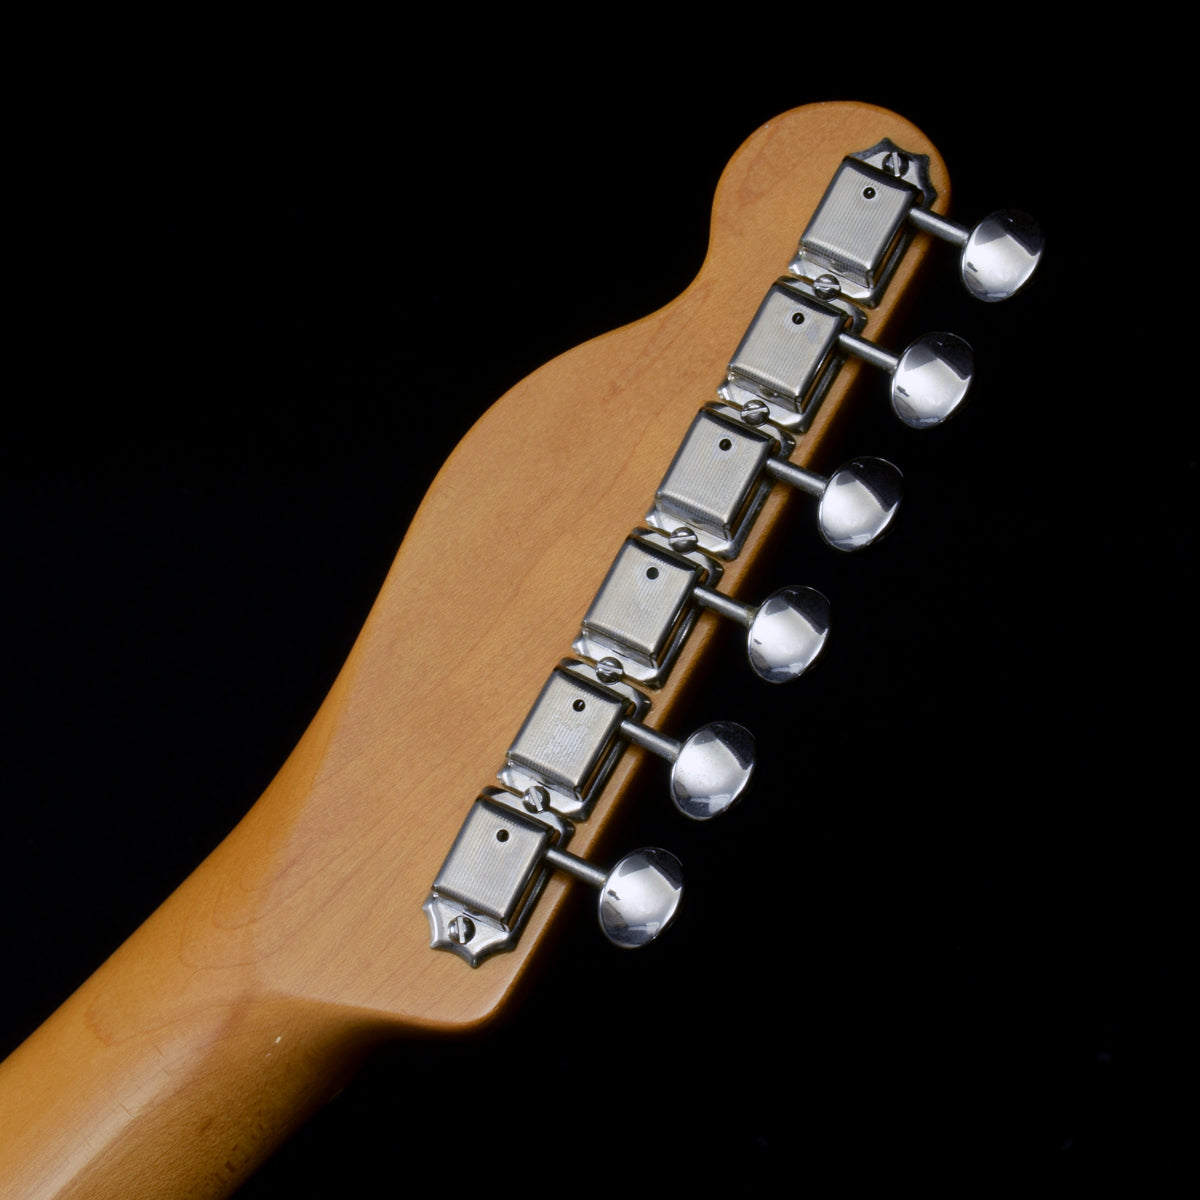 [SN 042 OF 1000] USED Fender USA Fender / 60th Anniversary Telecaster Limited Edition Natural [20]